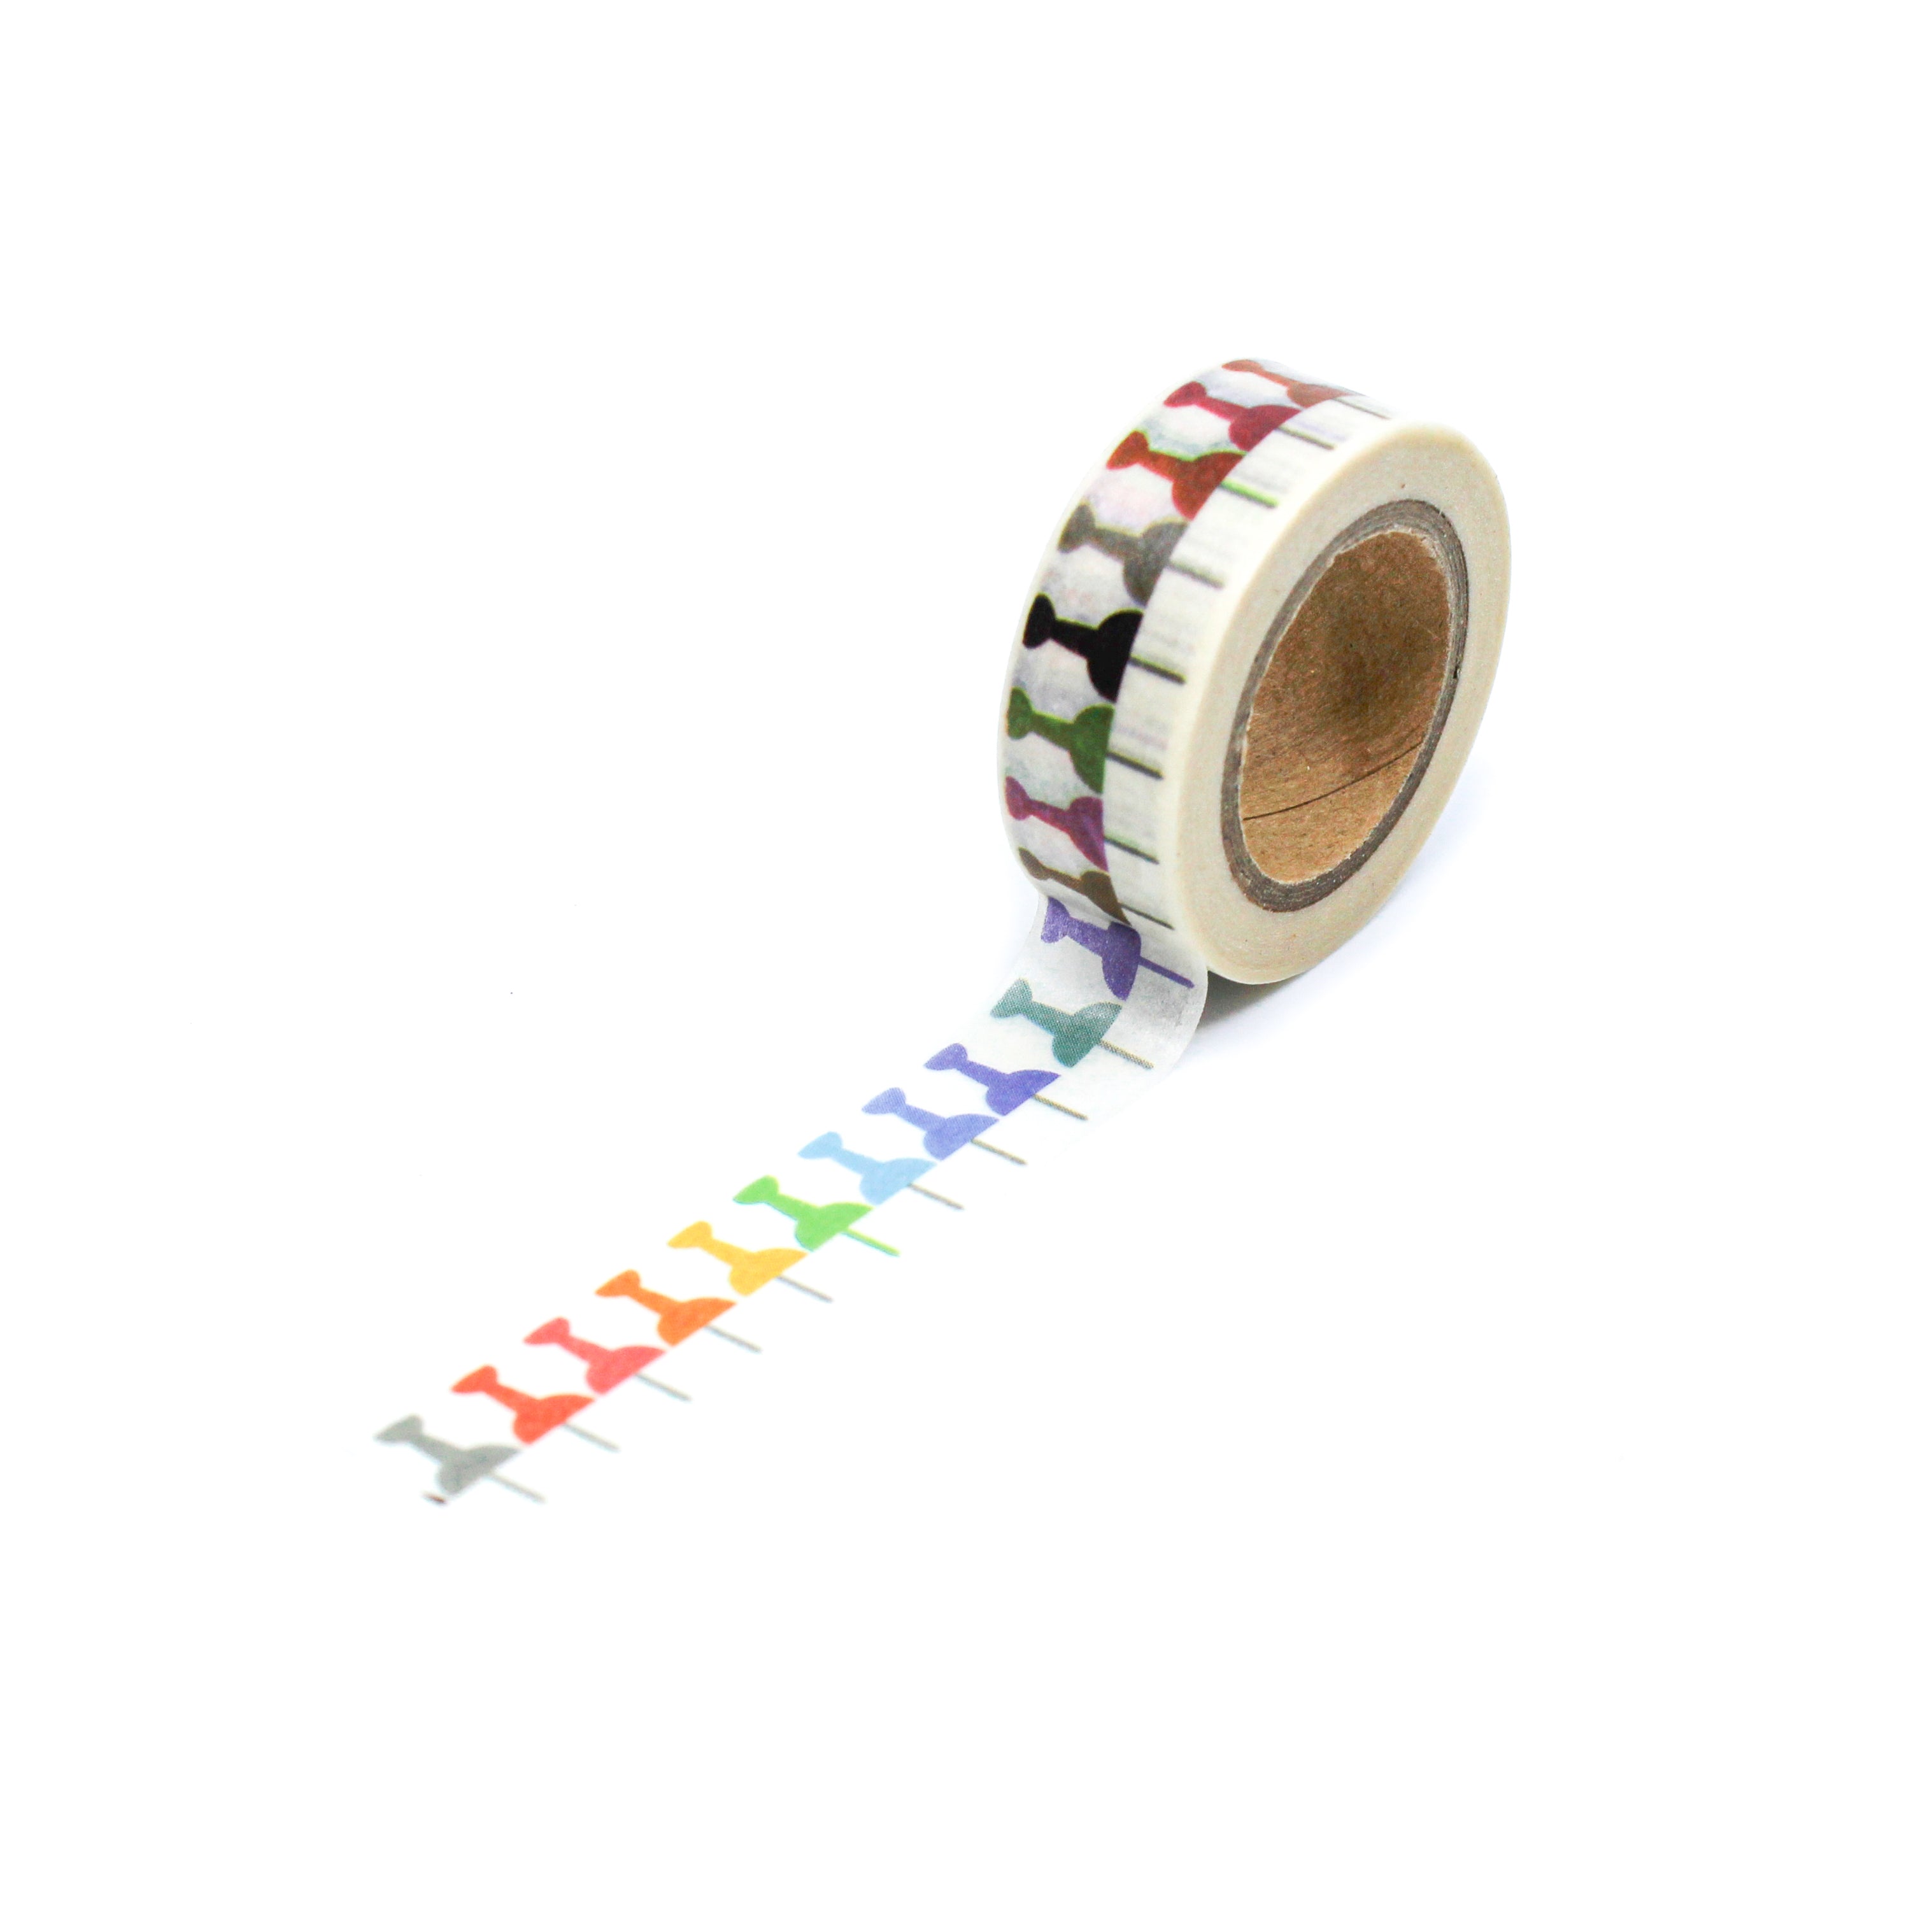 This is a full pattern repeat view of colorful push pins washi tape BBB Supplies Craft Shop